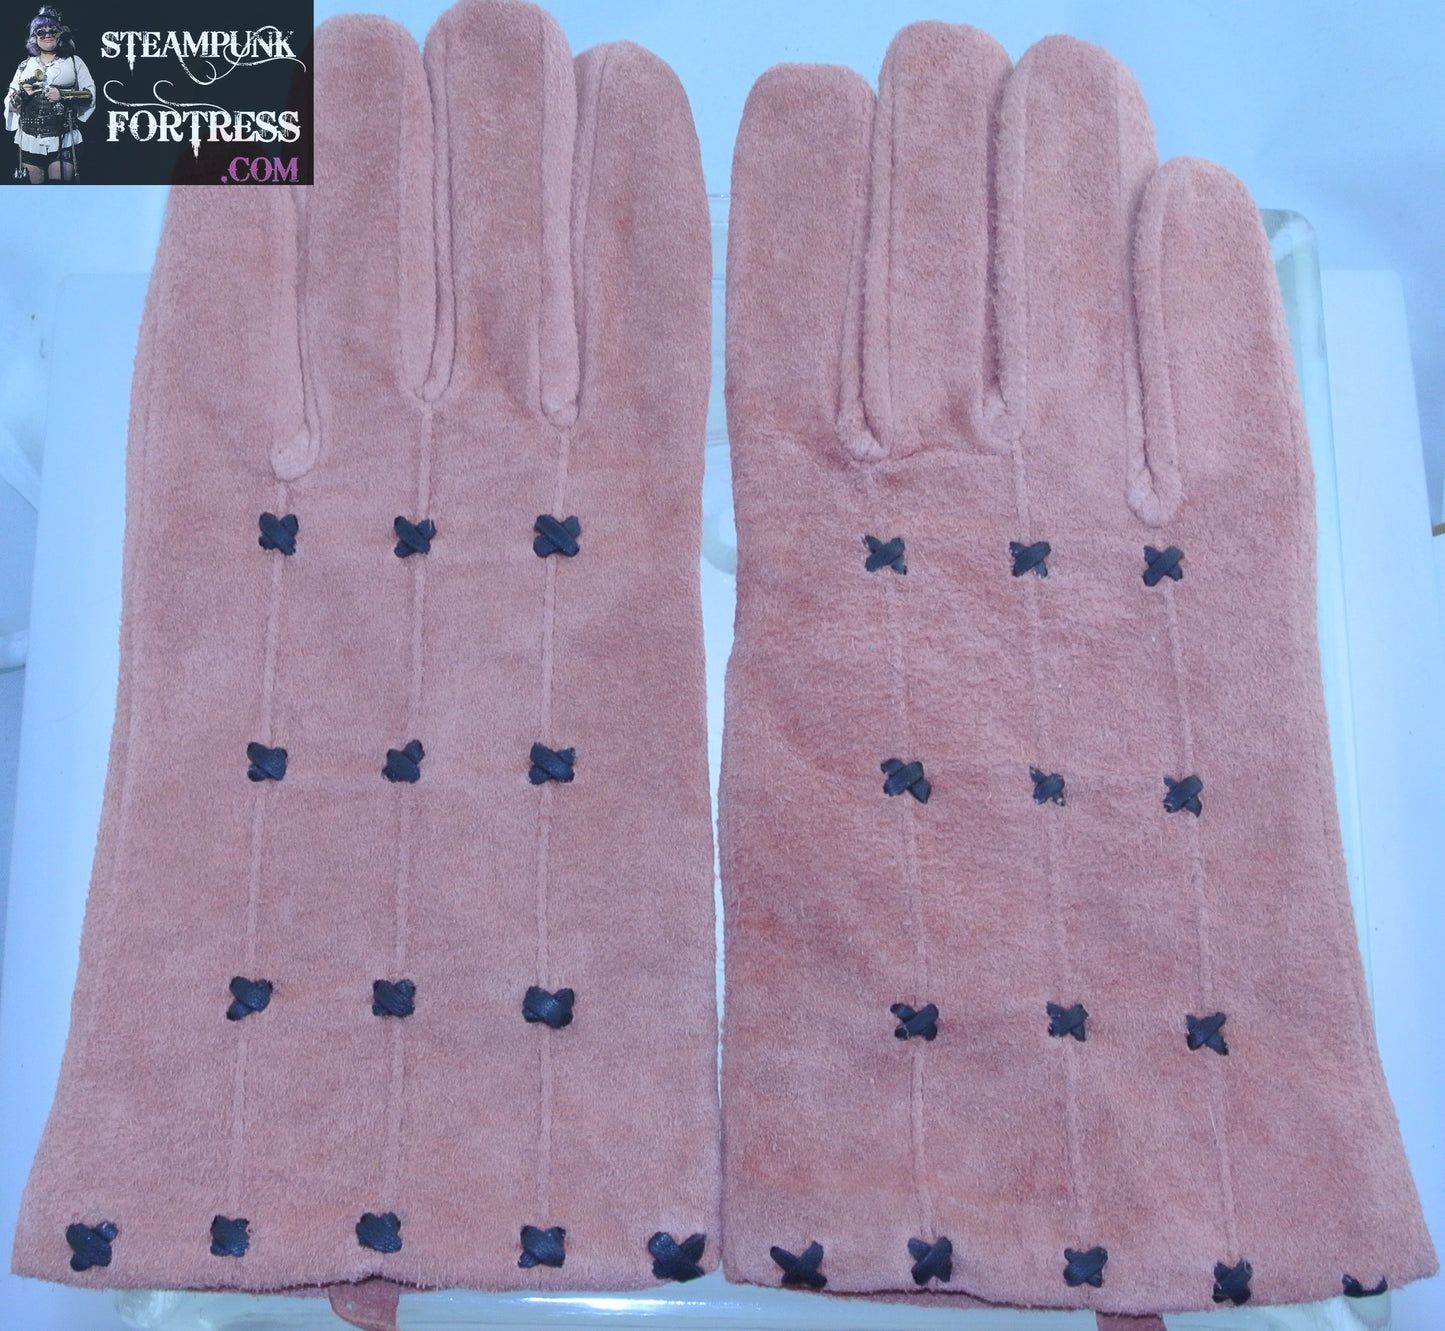 NEW DUSTY ROSE PINK SUEDE LEATHER GLOVES BLACK X DETAILS MEDIUM LARGE REDFISH - MASS PRODUCED